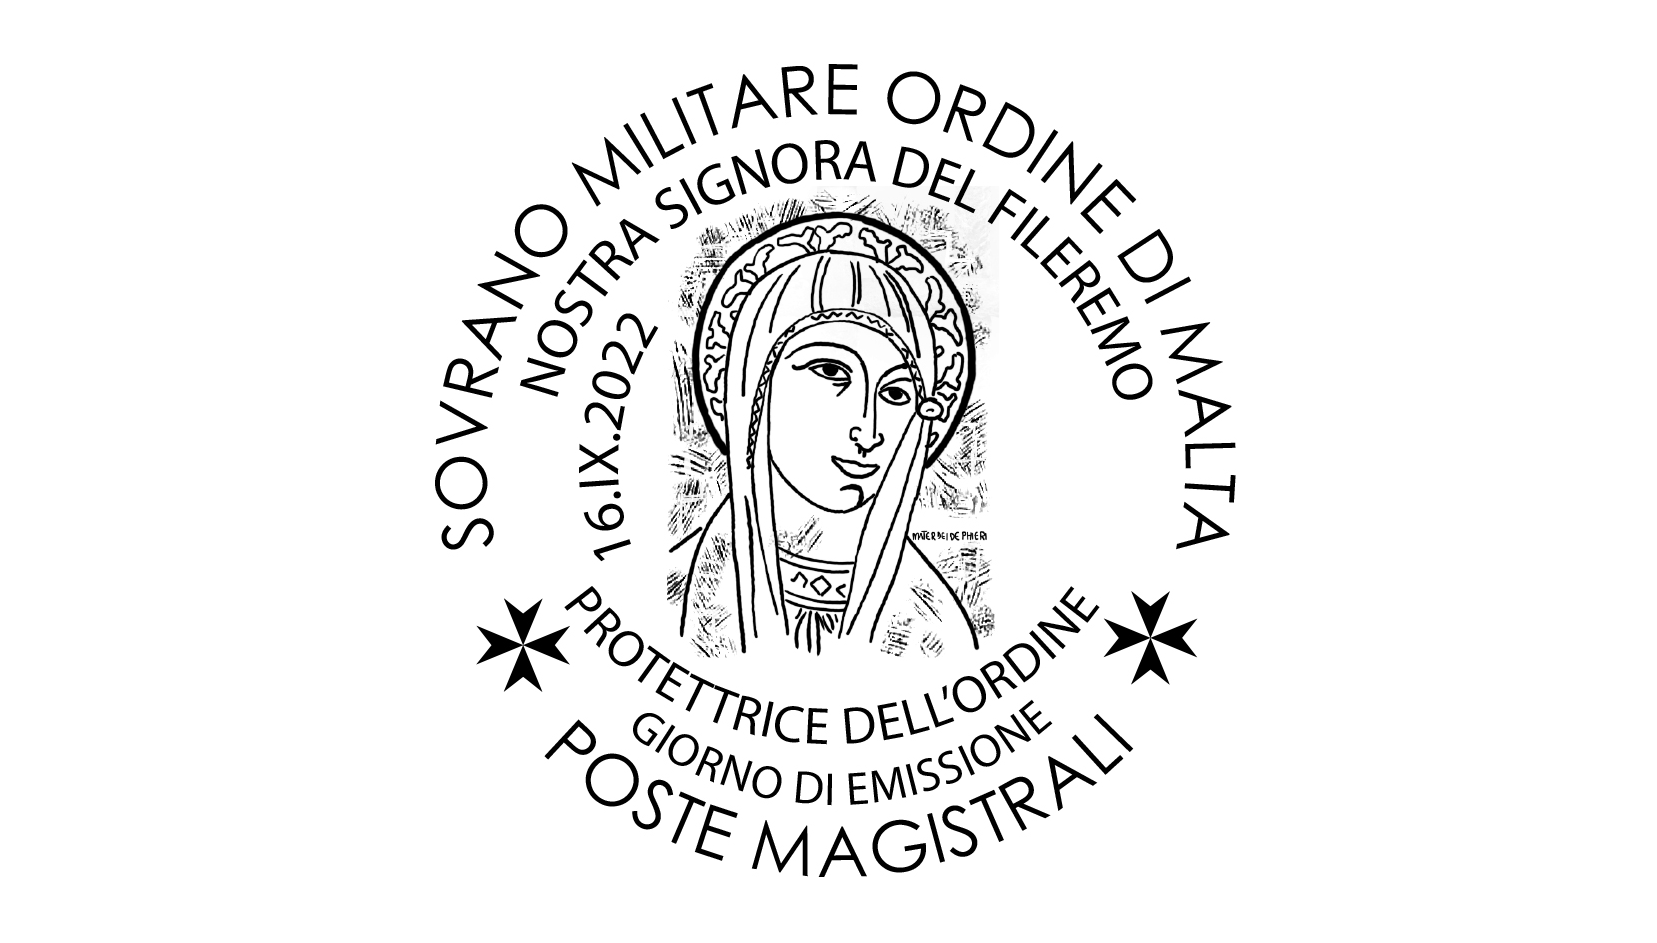 First day of issue postmark – Our Lady of Philermos, Protector of the Order